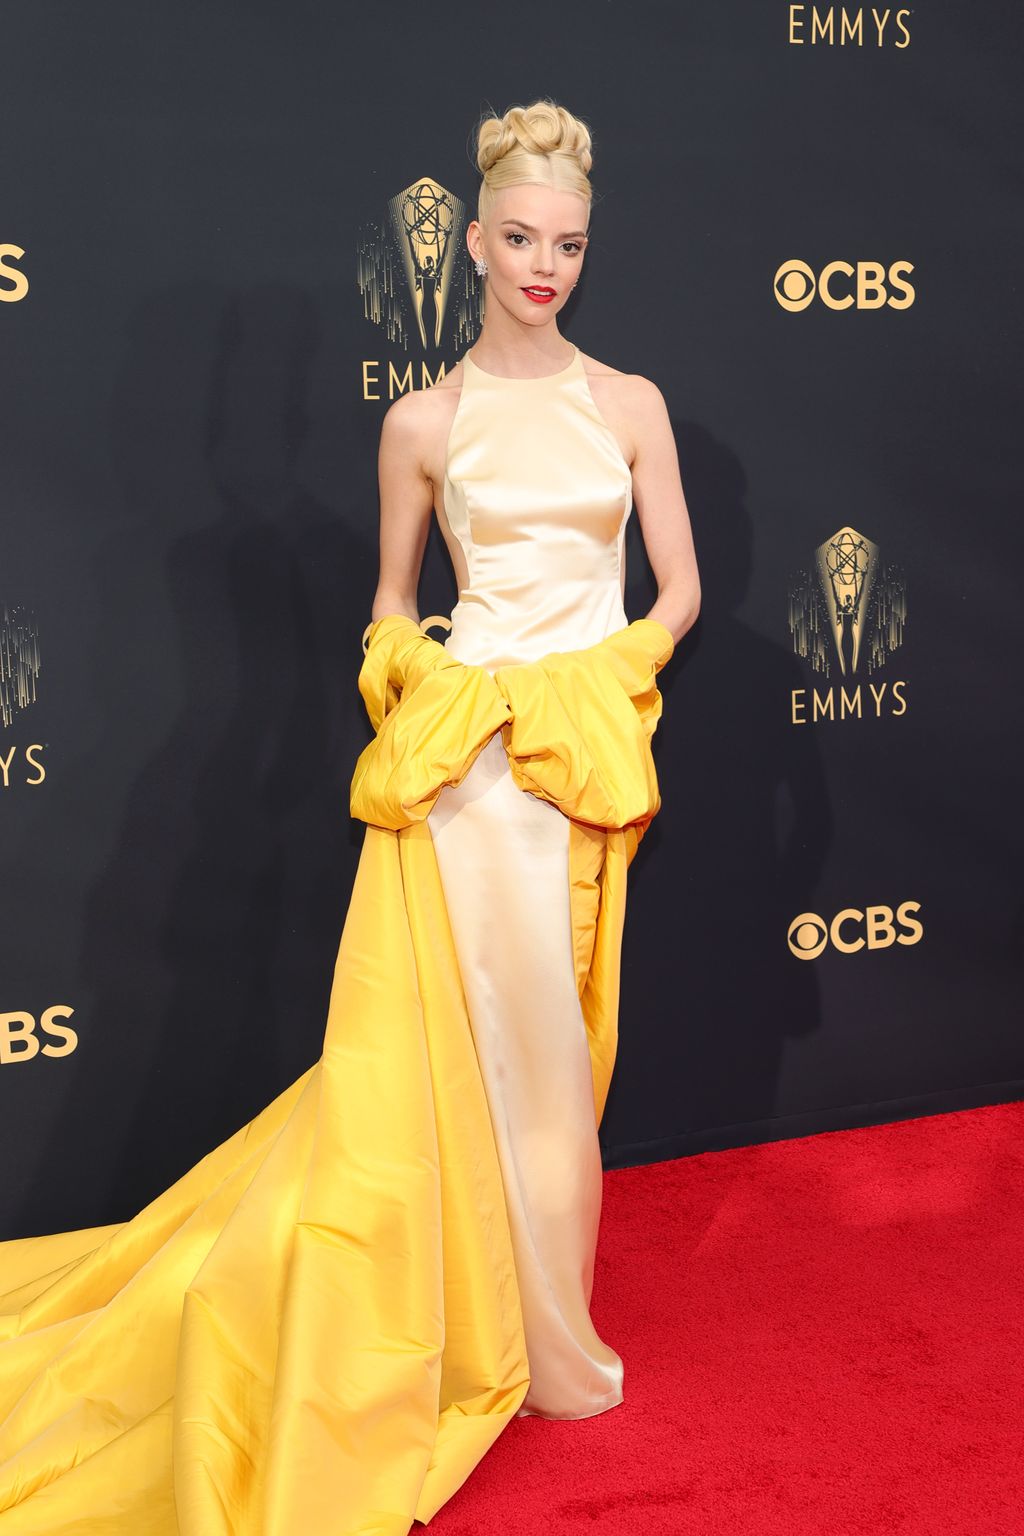 LOS ANGELES, CALIFORNIA - SEPTEMBER 19: Anya Taylor-Joy attends the 73rd Primetime Emmy Awards at L.A. LIVE on September 19, 2021 in Los Angeles, California. (Photo by Rich Fury/Getty Images)